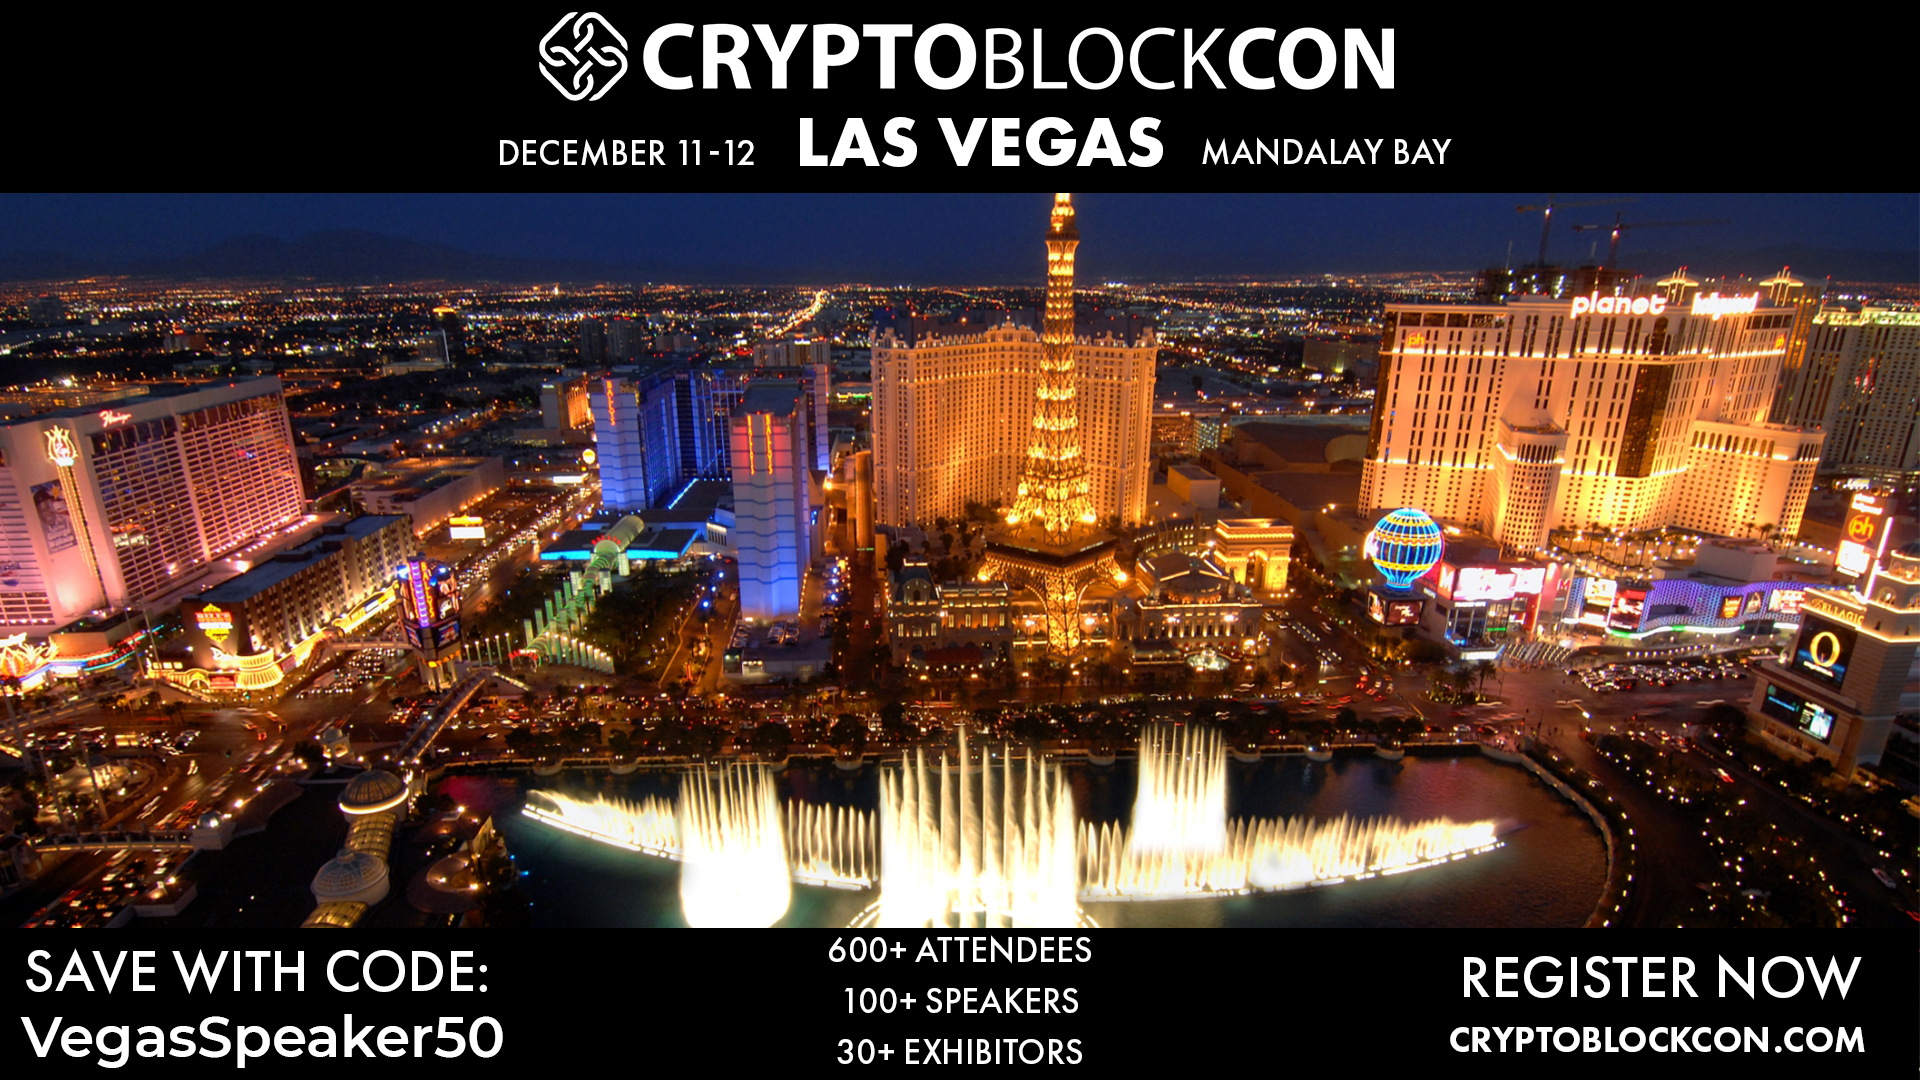 Header Image of CryptoBlockCon with CoinStructive Code included